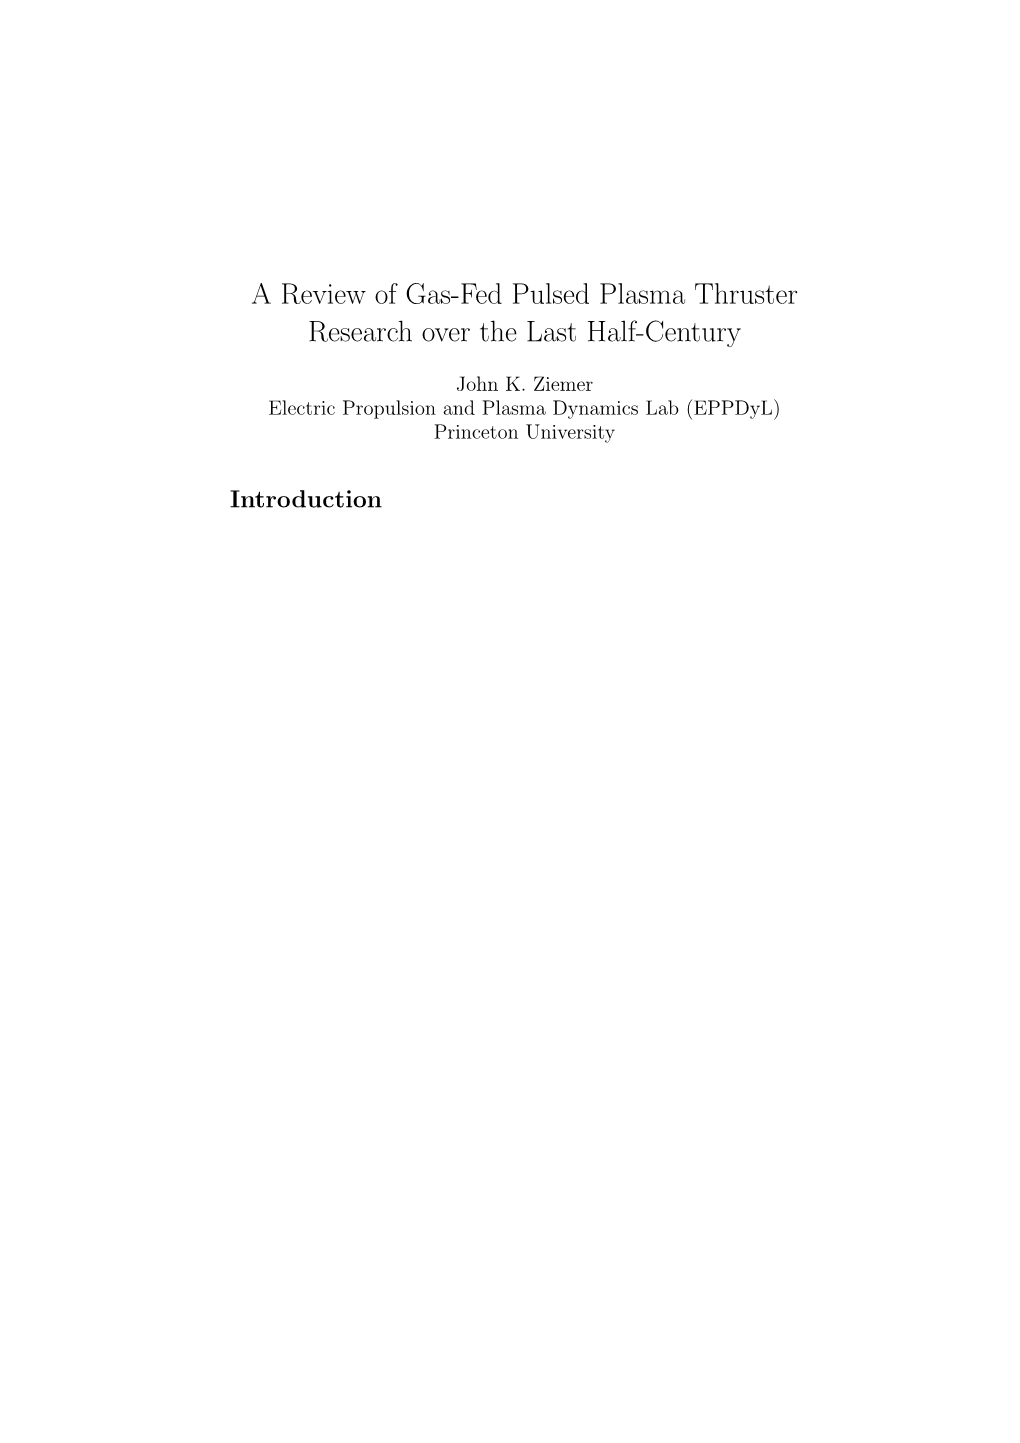 A Review of Gas-Fed Pulsed Plasma Thruster Research Over the Last Half-Century